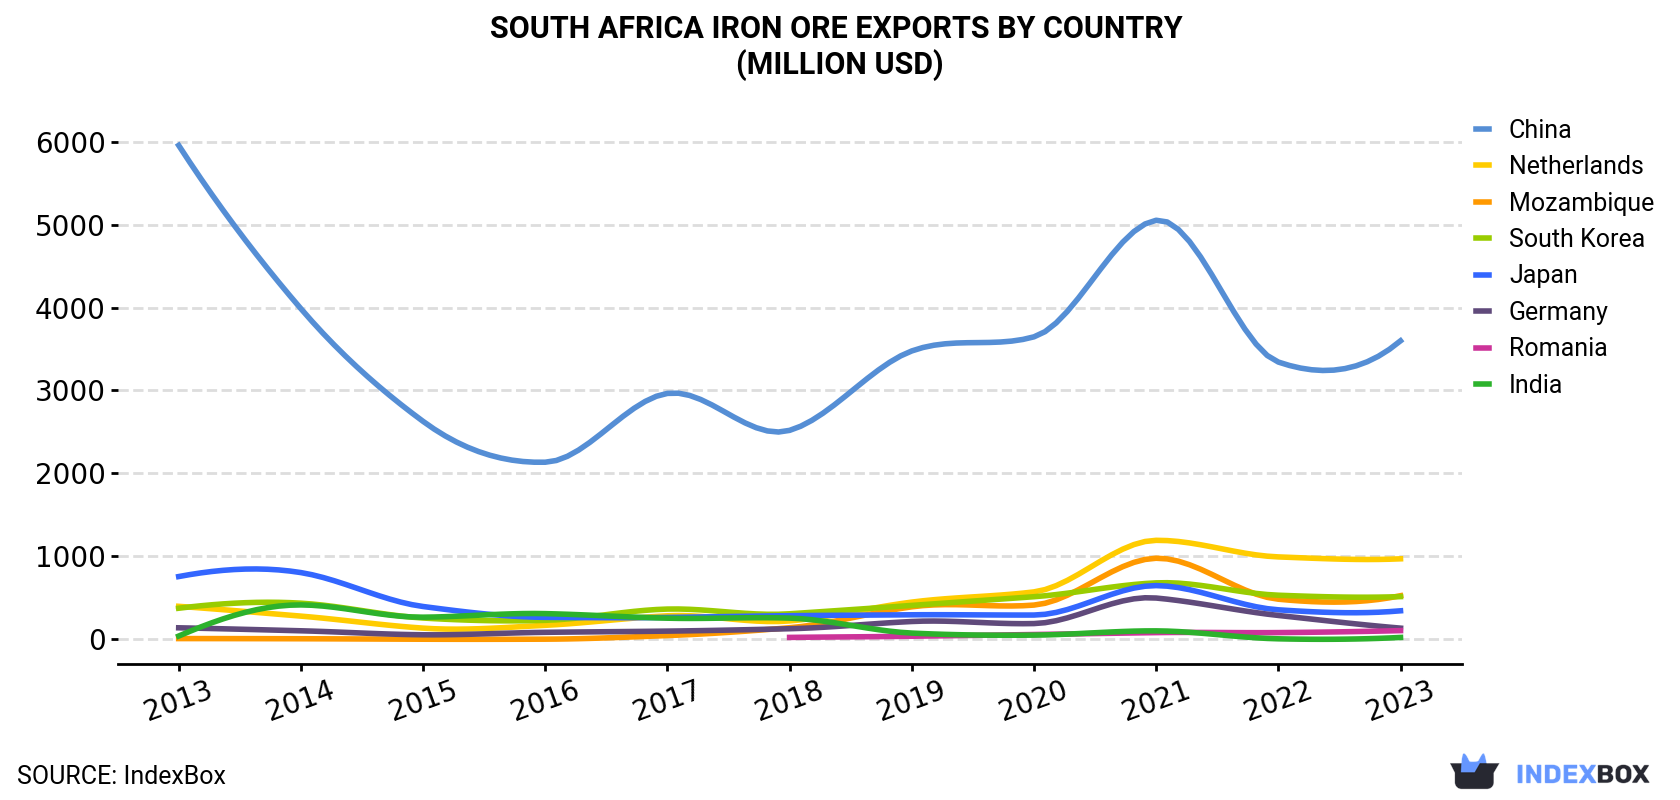 South Africa Iron Ore Exports By Country (Million USD)